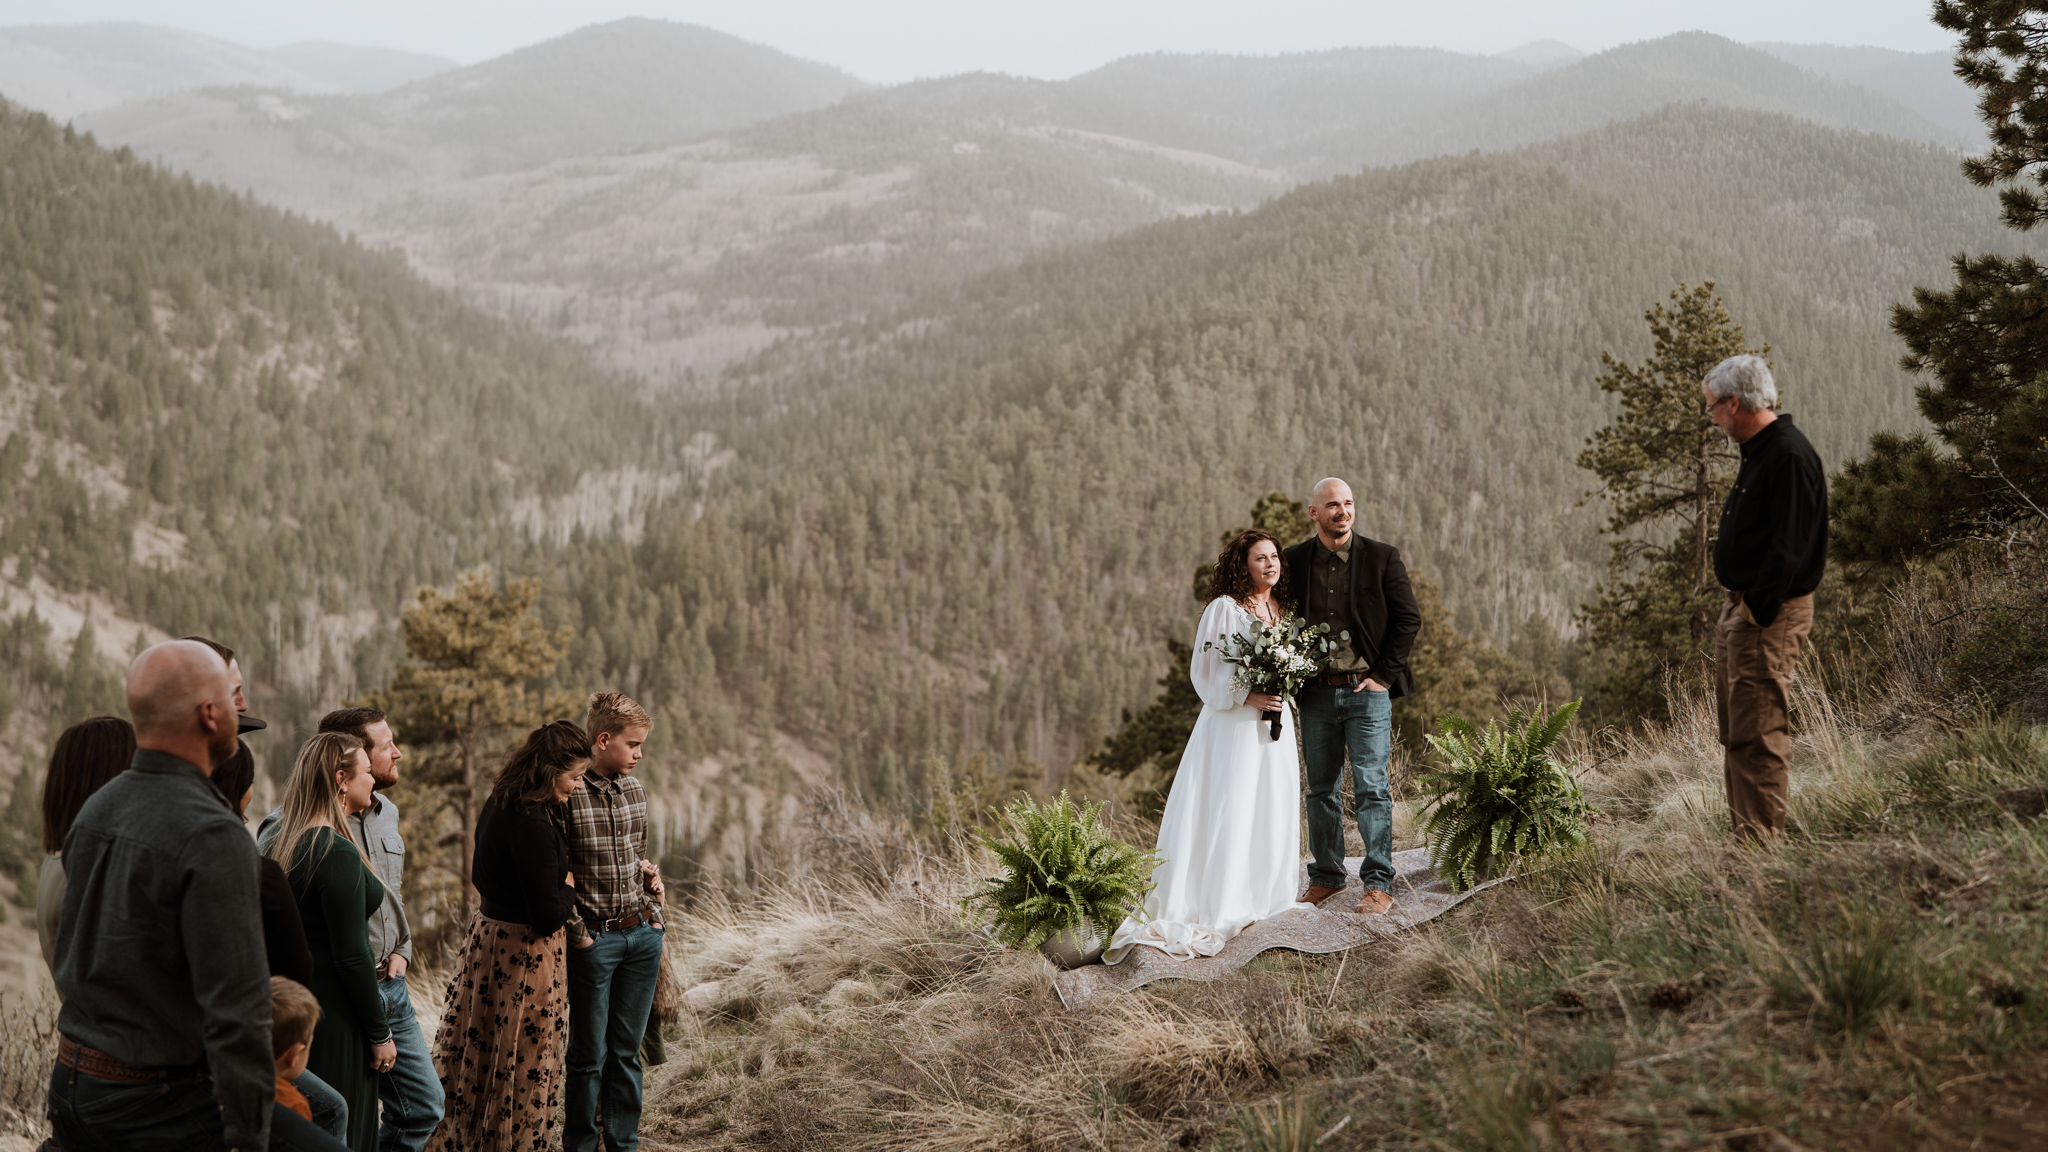 Family focused Wedding in Colorado by Basecamp Visual